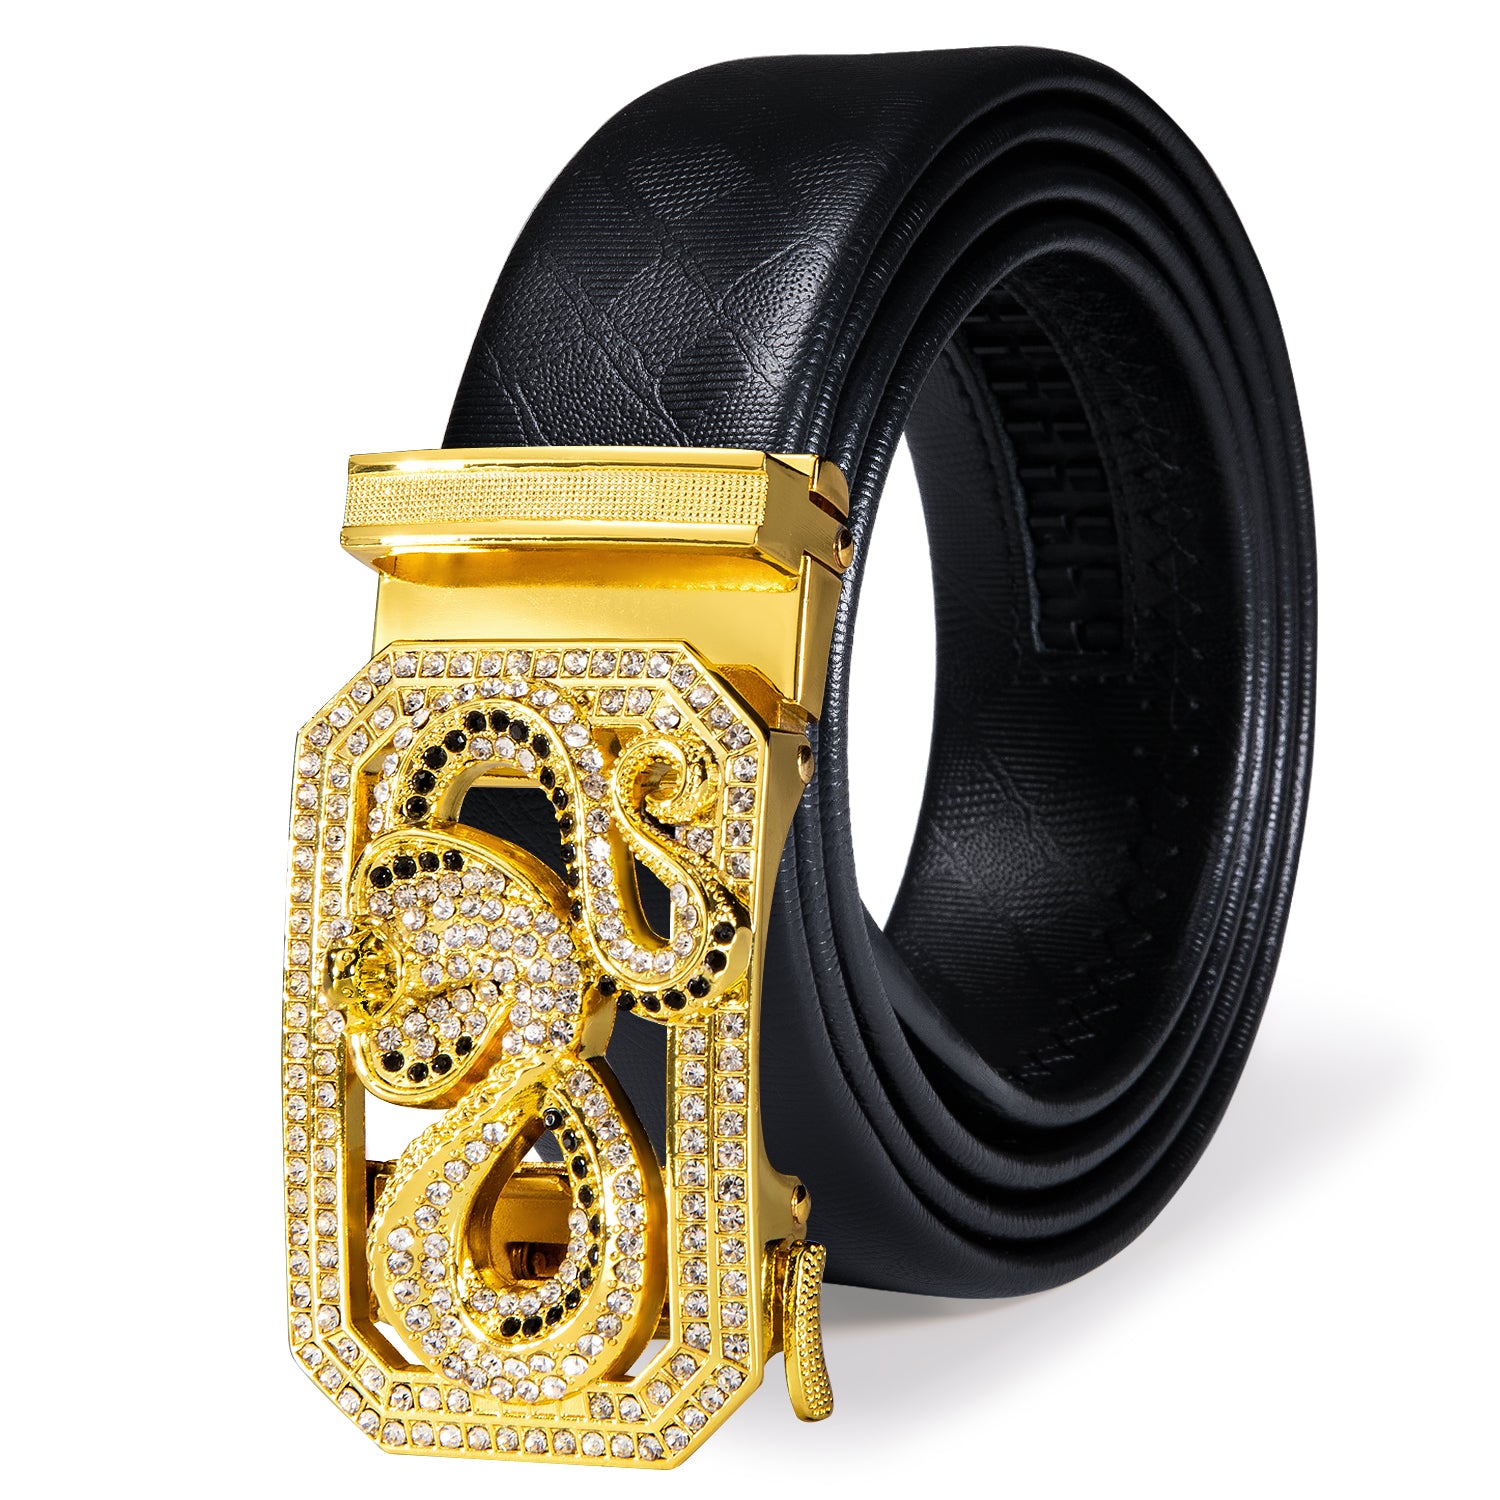 Golden Diamond Metal Automatic Buckle Black Leather Belt 43 inch to 63 inch